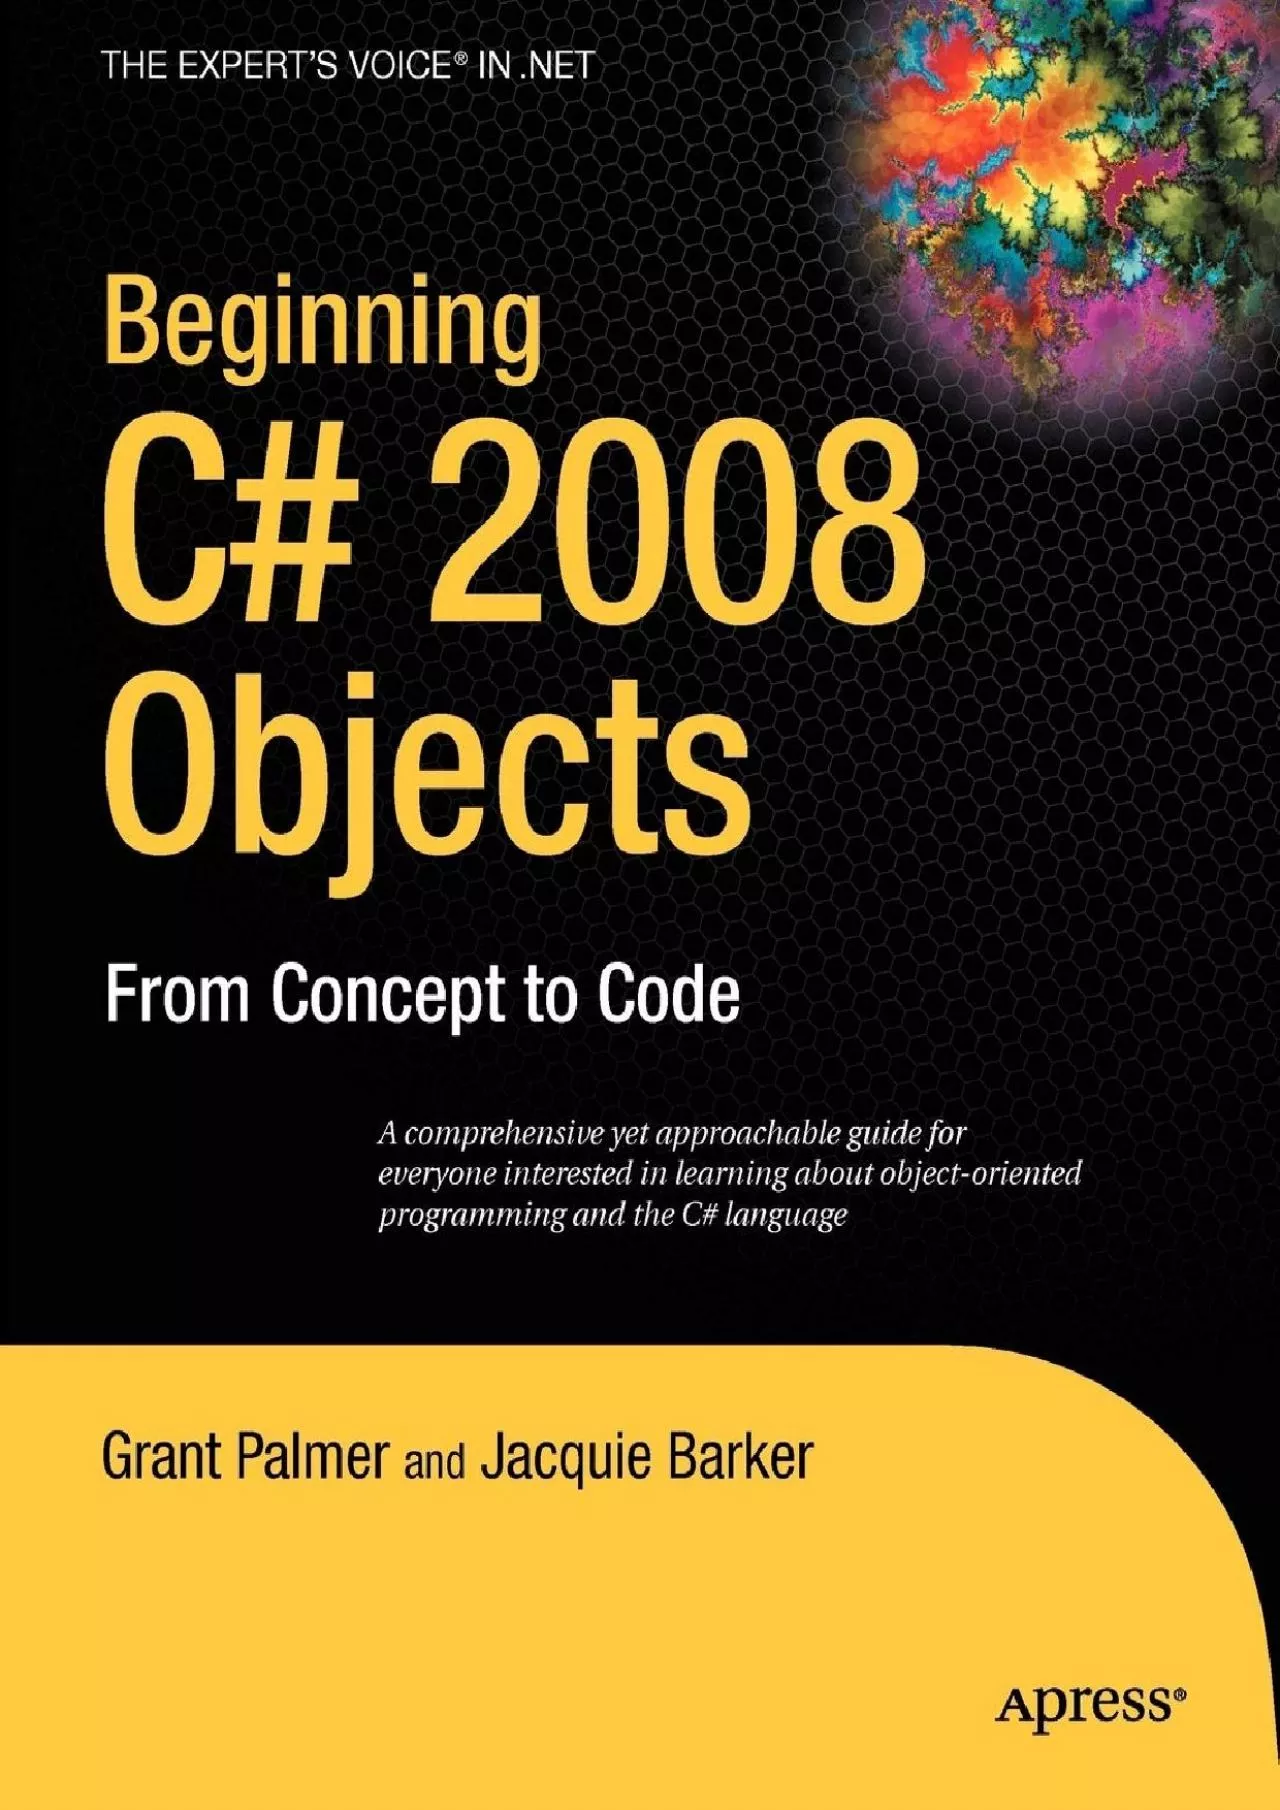 [PDF]-Beginning C 2008 Objects: From Concept to Code (Expert\'s Voice in .NET)